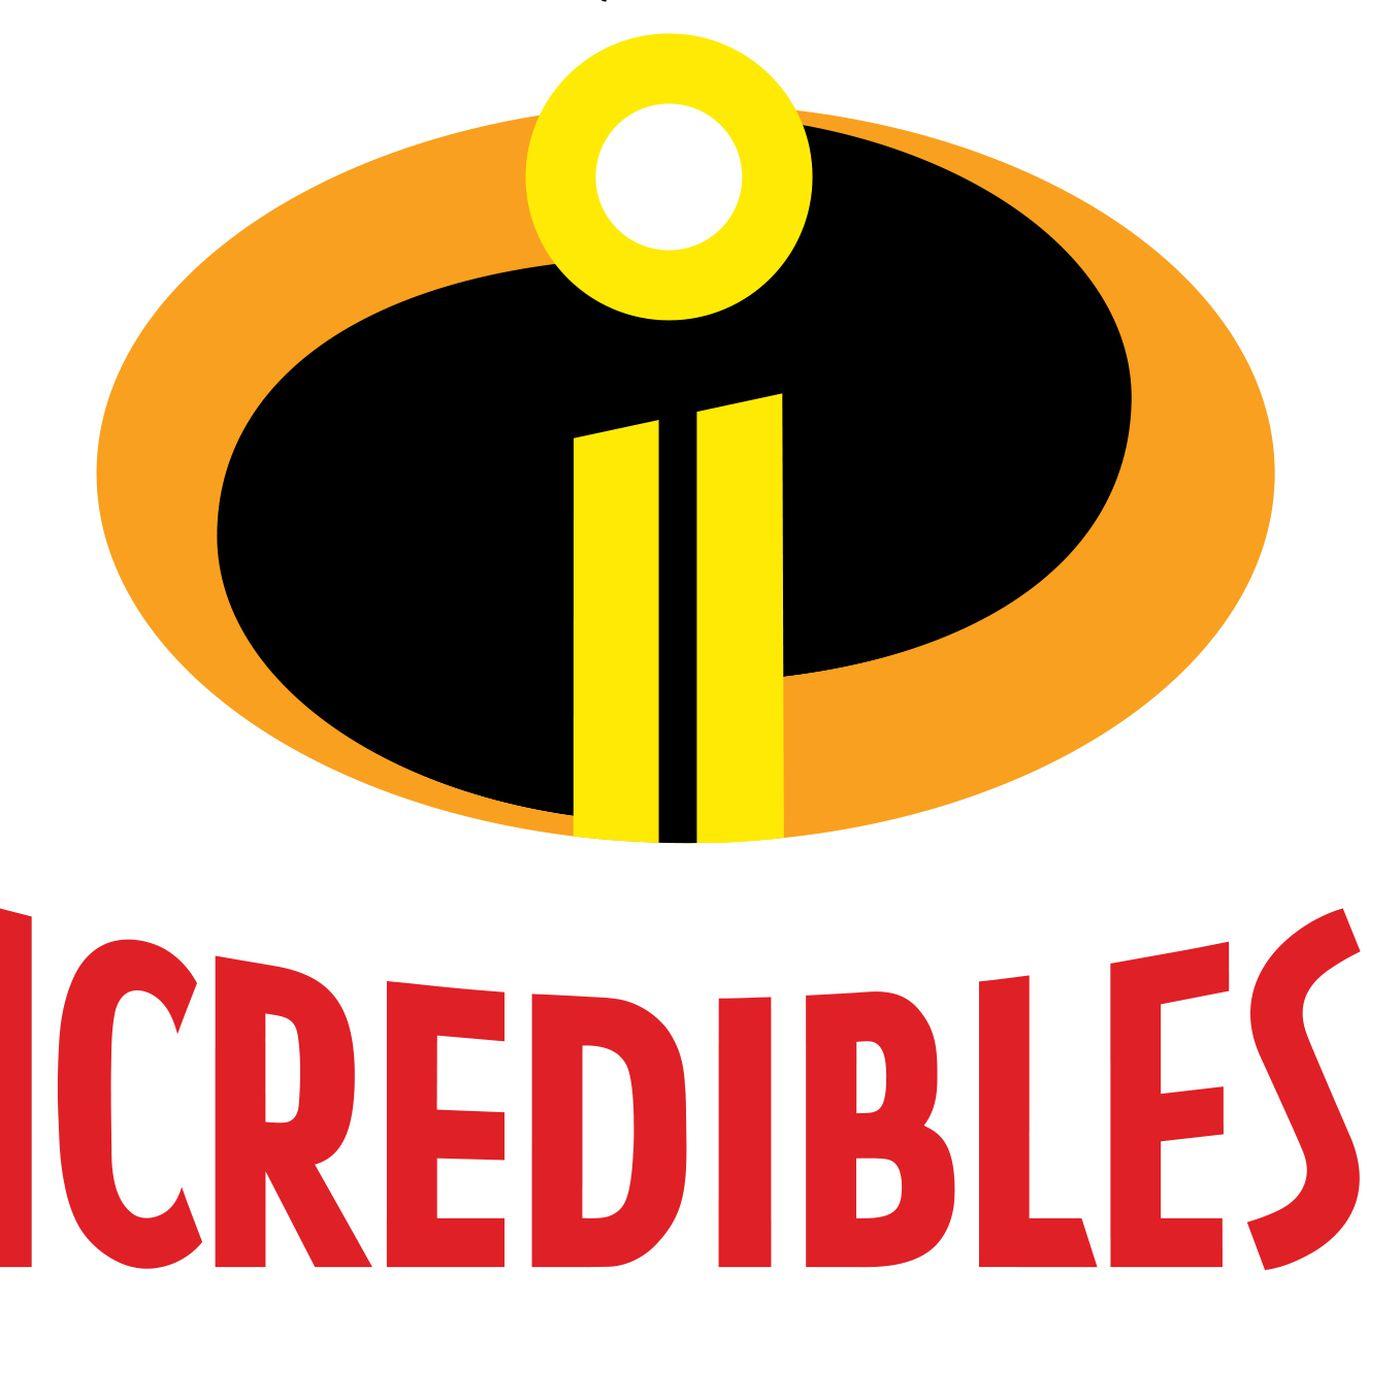 2 Disney Pixar Incredibles Logo - The Incredibles Toy Story 4 and. Planes? What we learned